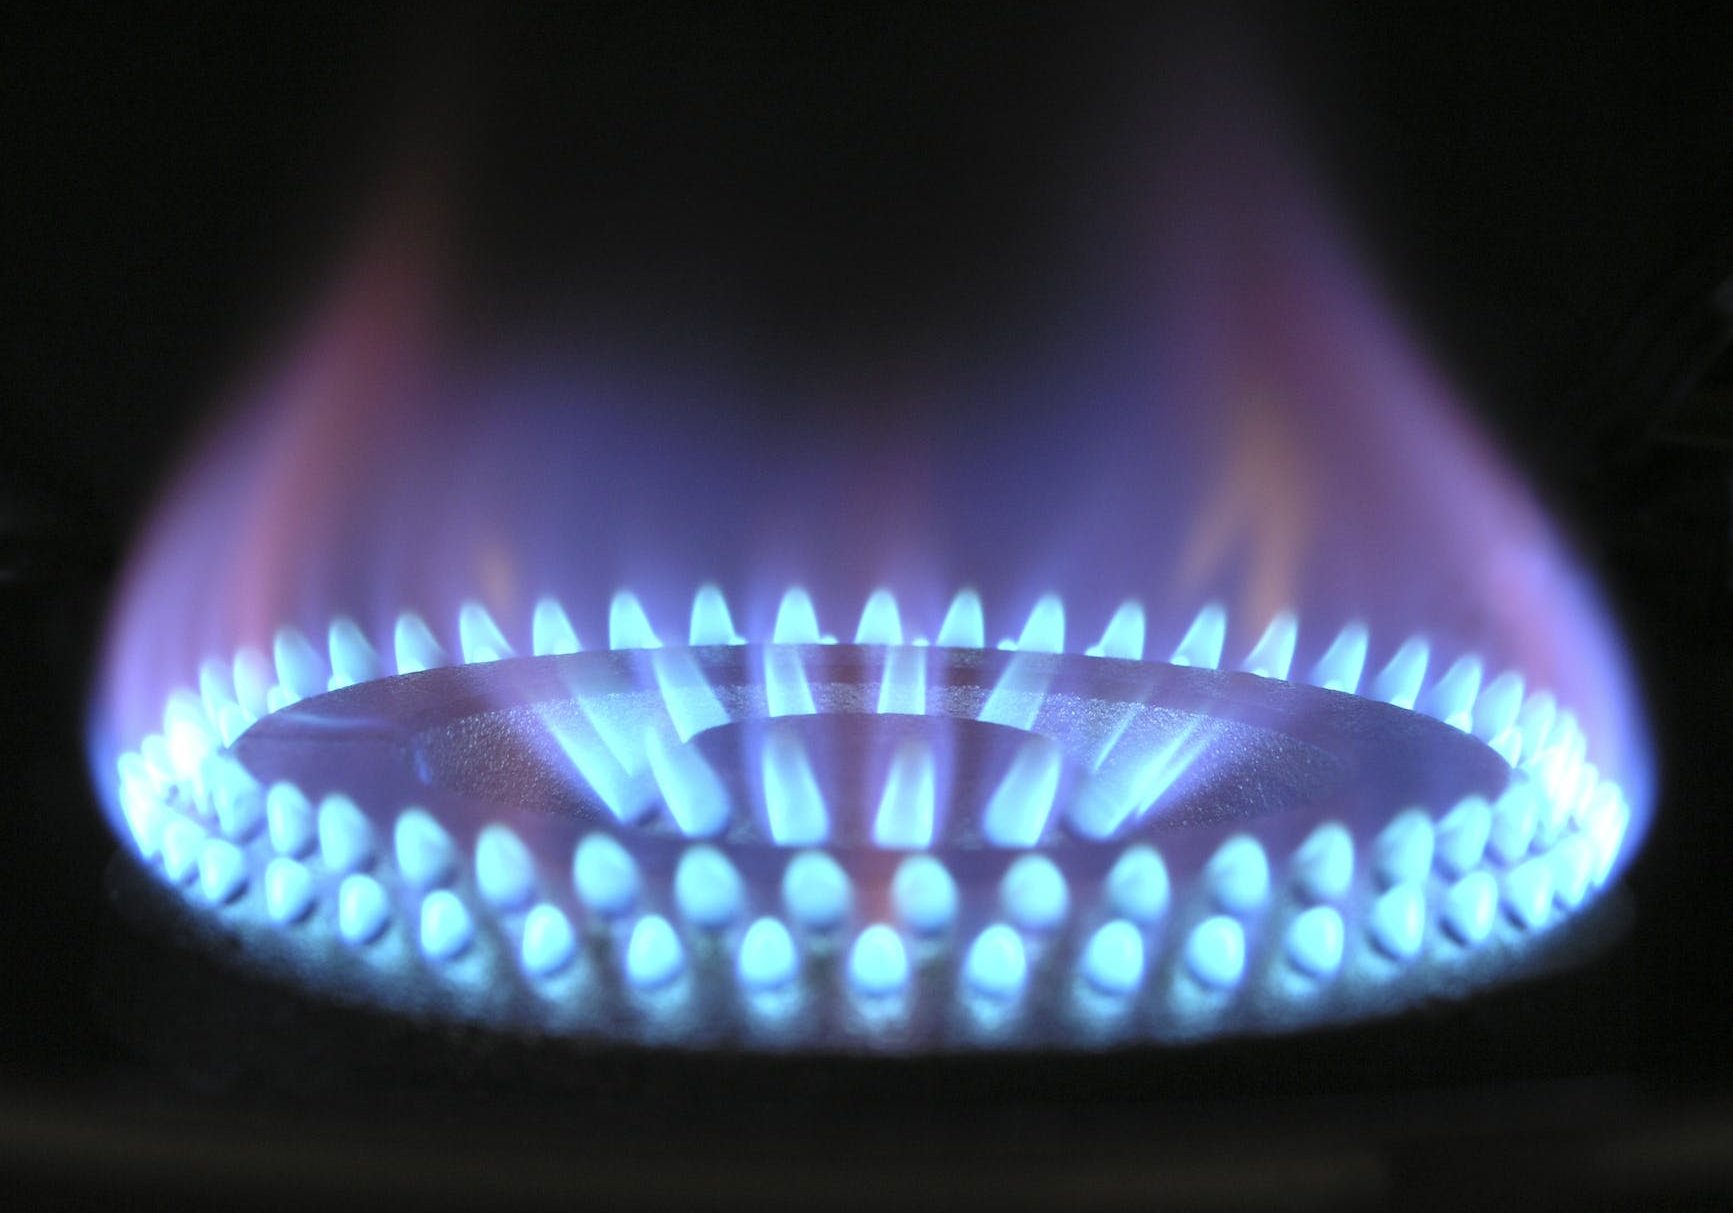 Photo by Pixabay on <a href="https://www.pexels.com/photo/burning-stove-266896/" rel="nofollow">Pexels.com</a>